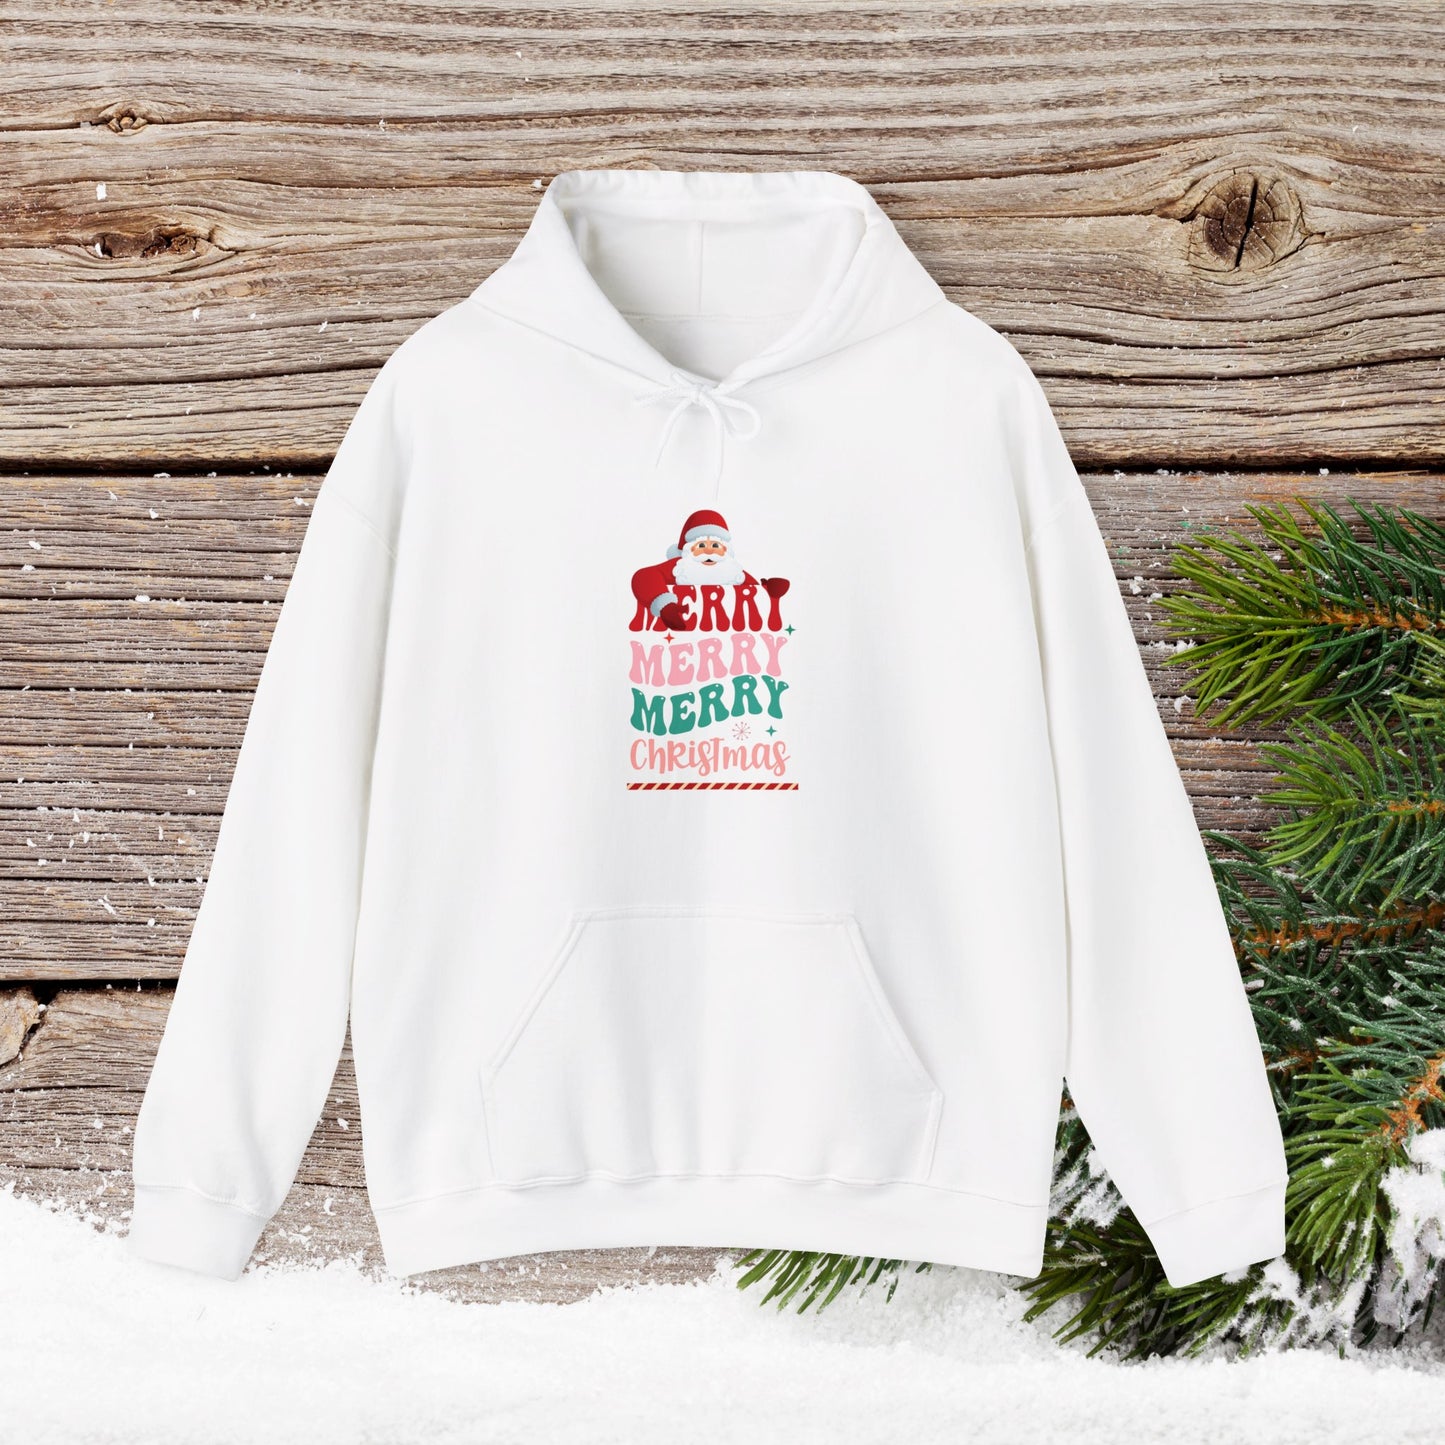 Christmas Hoodie - Merry Merry Merry Christmas - Cute Christmas Shirts - Youth and Adult Christmas Hooded Sweatshirt Hooded Sweatshirt Graphic Avenue White Adult Small 